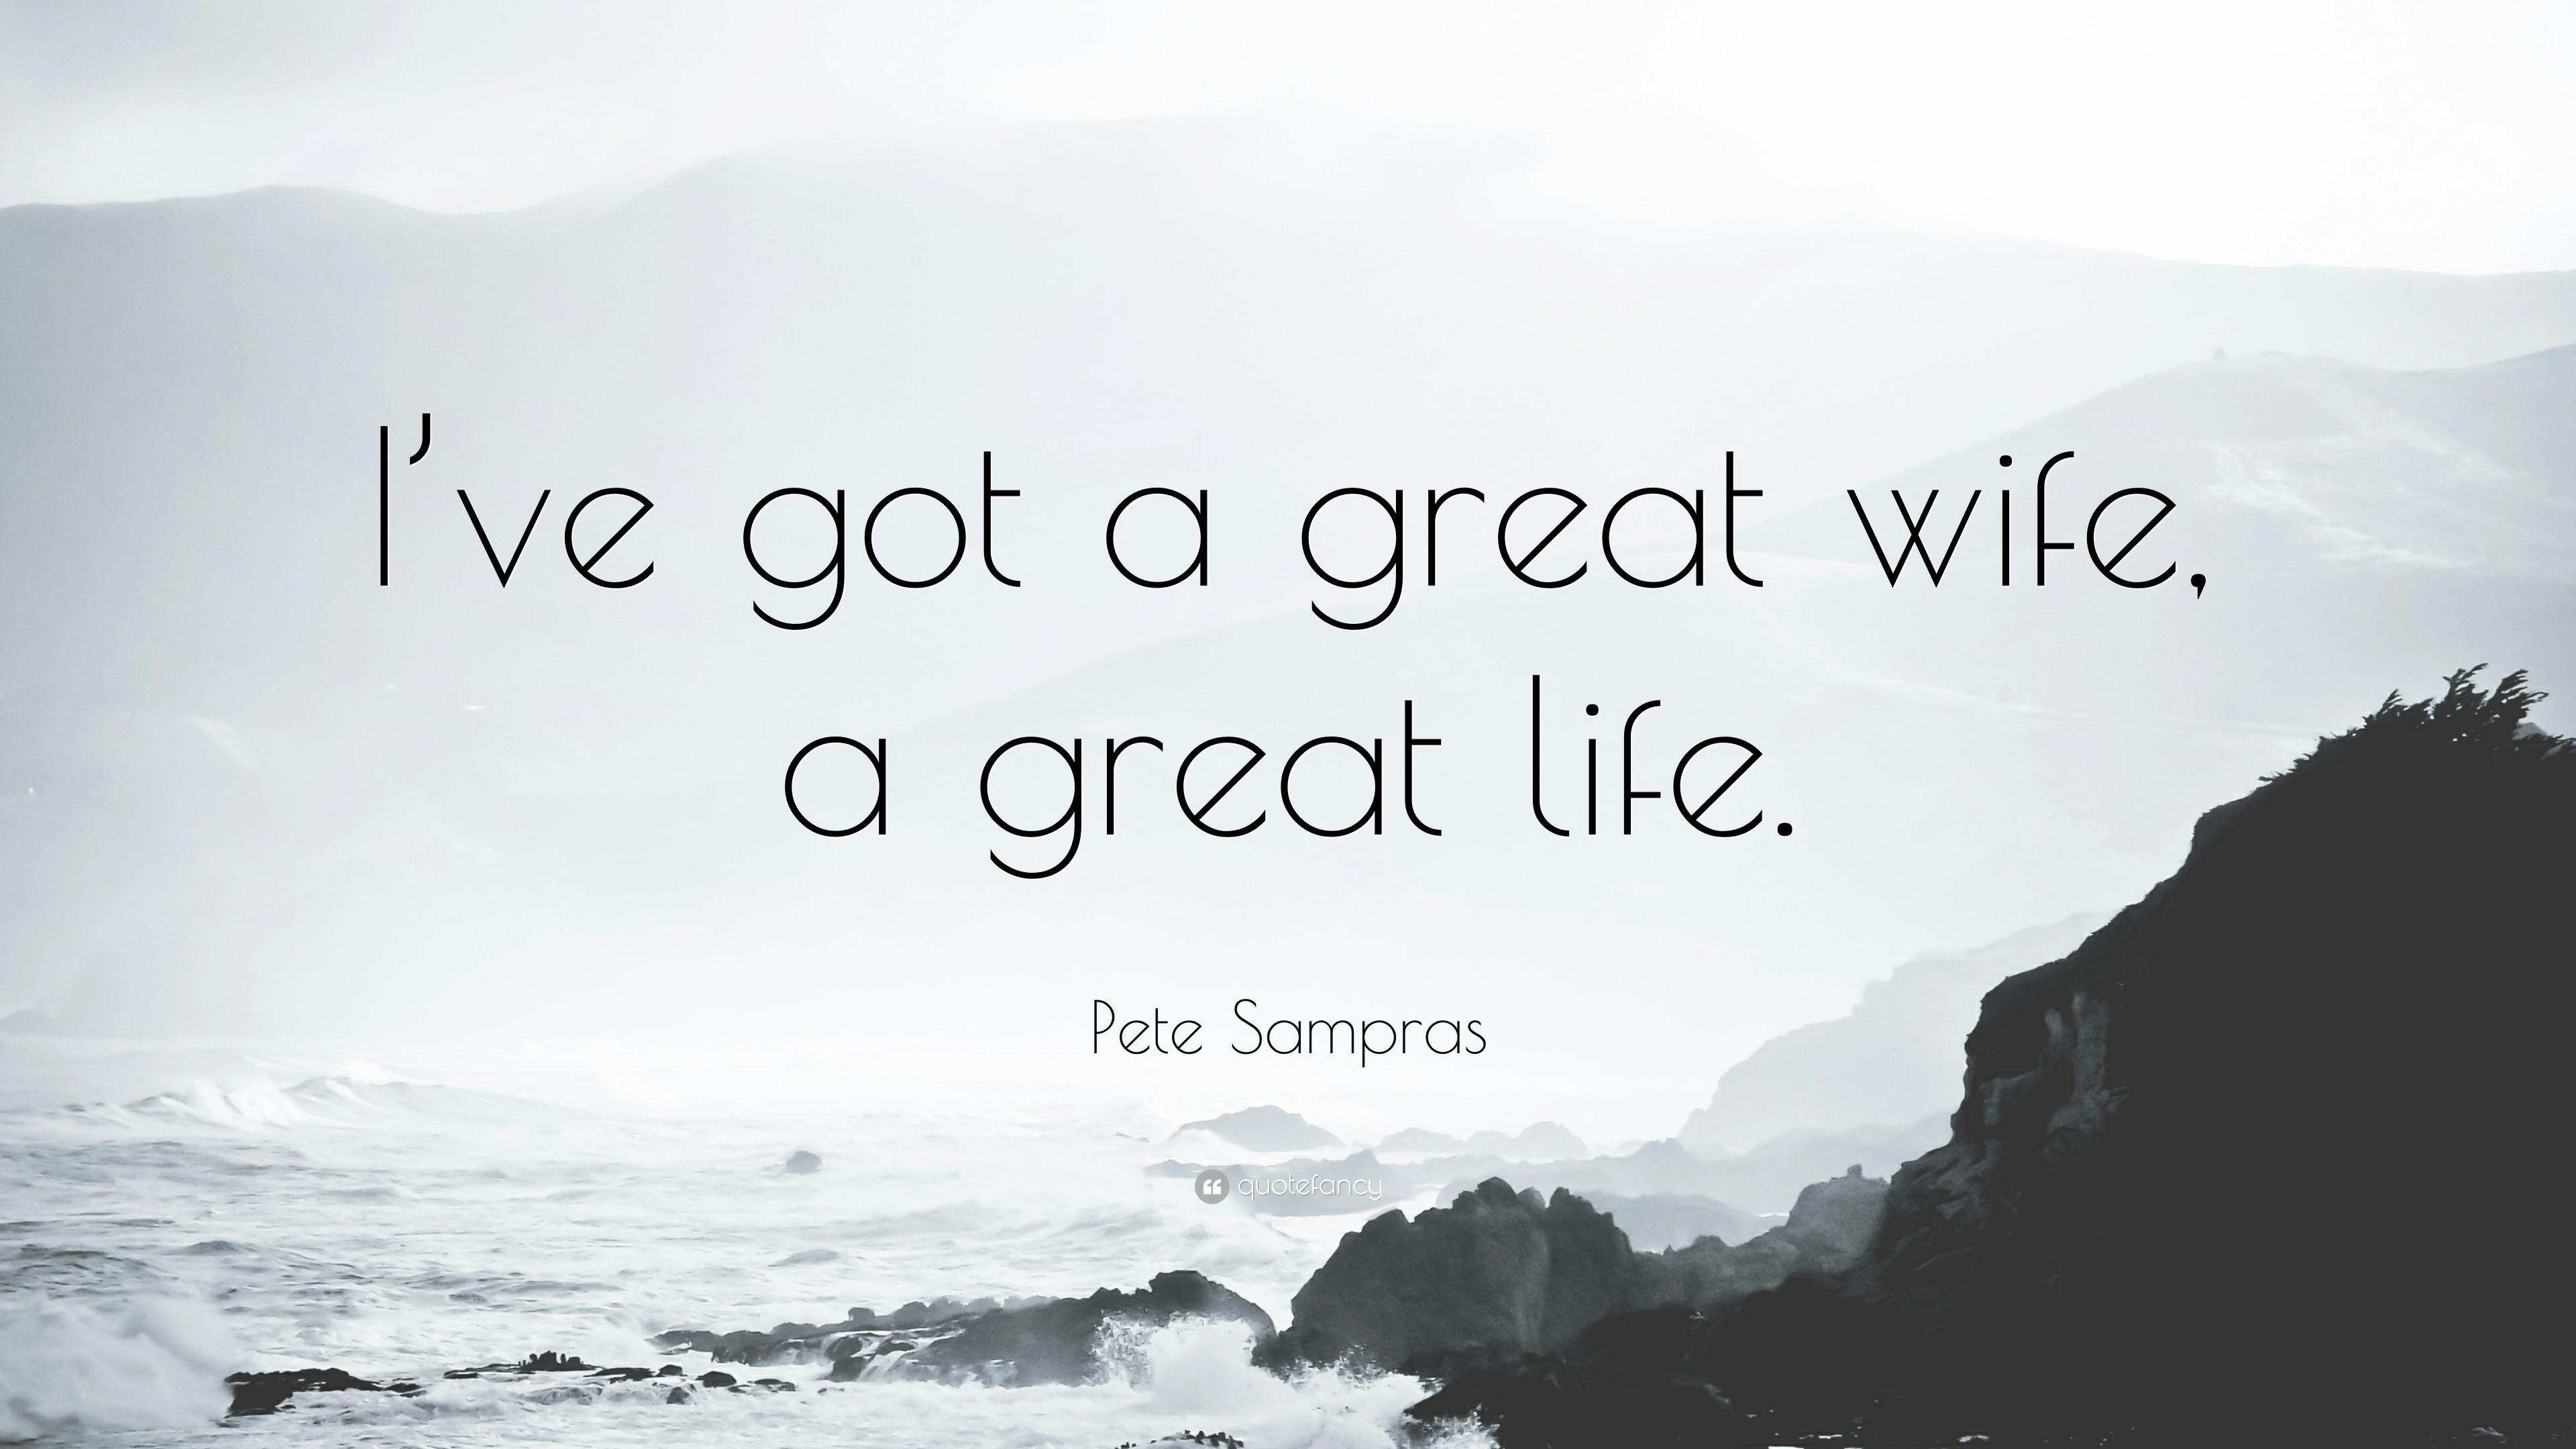 Pete Sampras Quote: “I've got a great wife, a great life